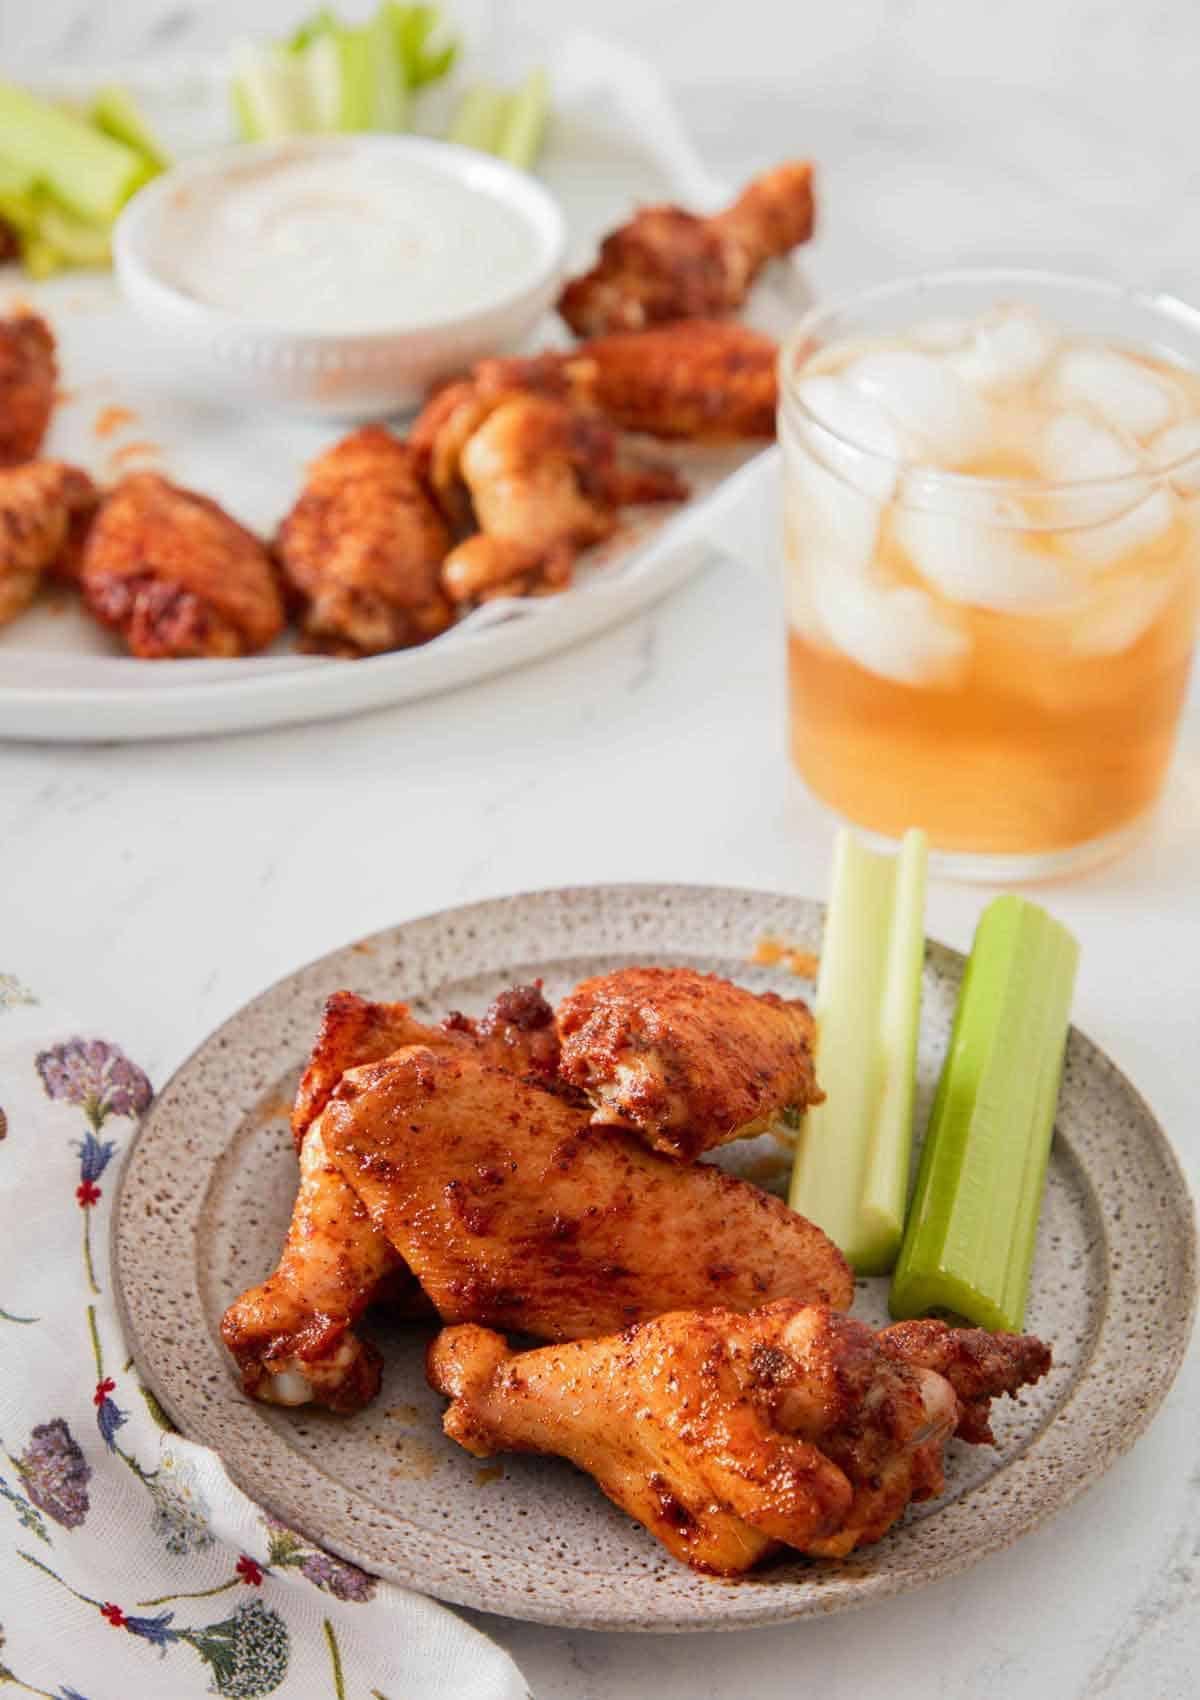 A plate with three chicken wings and celery with more in the background along with an iced drink.